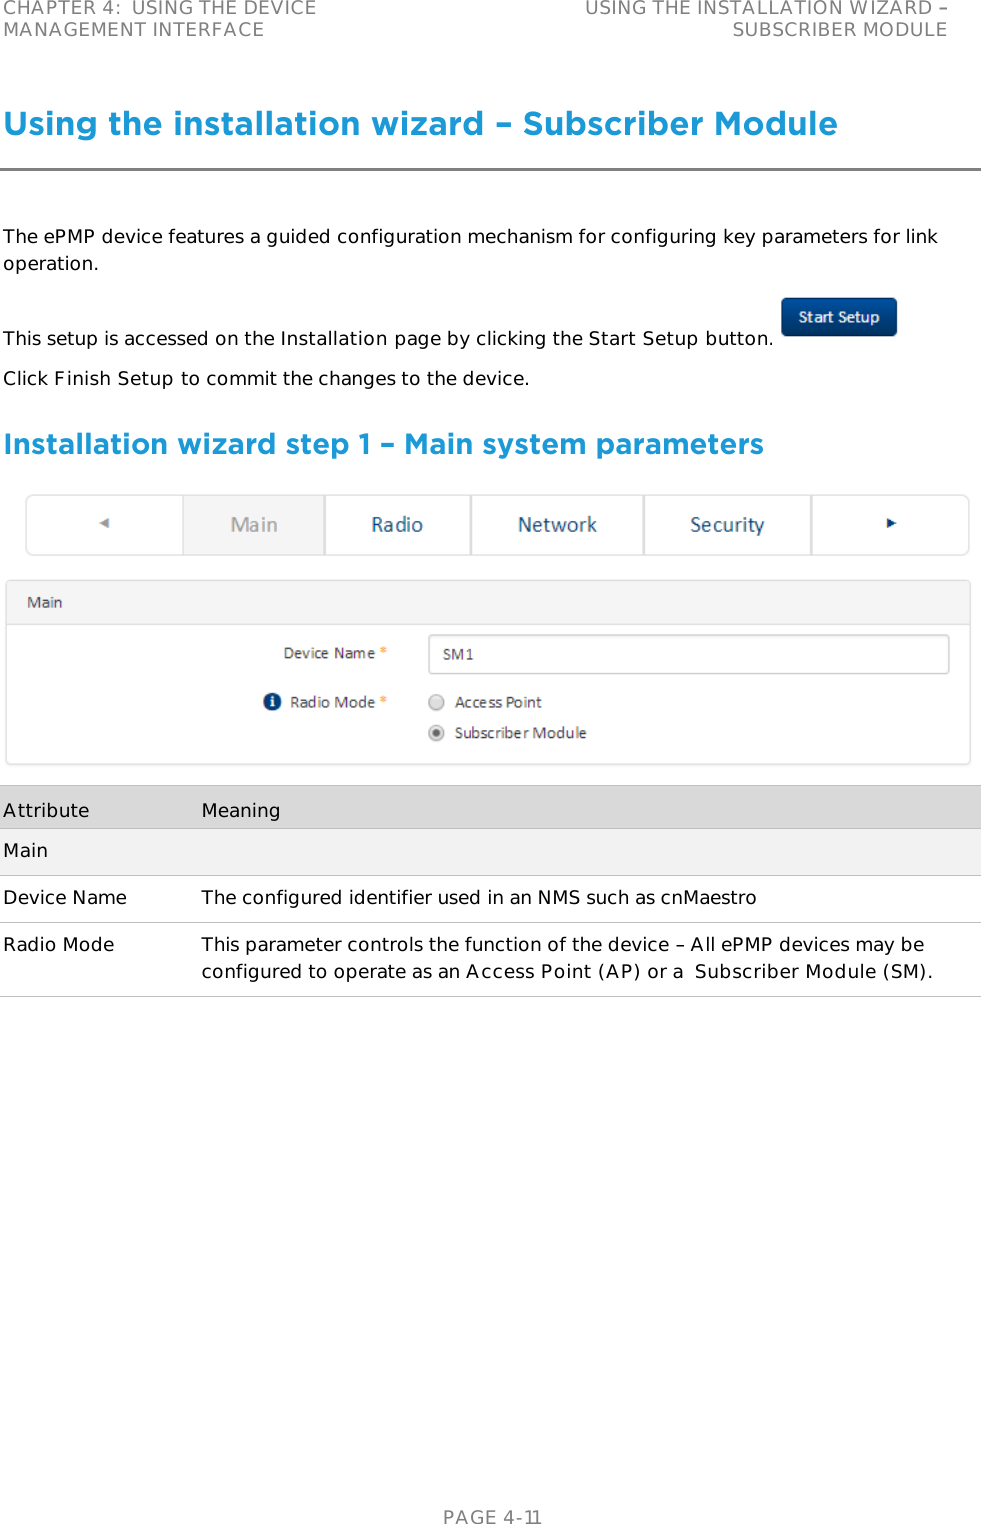 CHAPTER 4:  USING THE DEVICE MANAGEMENT INTERFACE USING THE INSTALLATION WIZARD   SUBSCRIBER MODULE   PAGE 4-11 Using the installation wizard – Subscriber Module The ePMP device features a guided configuration mechanism for configuring key parameters for link operation. This setup is accessed on the Installation page by clicking the Start Setup button.  Click Finish Setup to commit the changes to the device. Installation wizard step 1 – Main system parameters  Attribute Meaning Main Device Name The configured identifier used in an NMS such as cnMaestro Radio Mode This parameter controls the function of the device   All ePMP devices may be configured to operate as an Access Point (AP) or a  Subscriber Module (SM). 